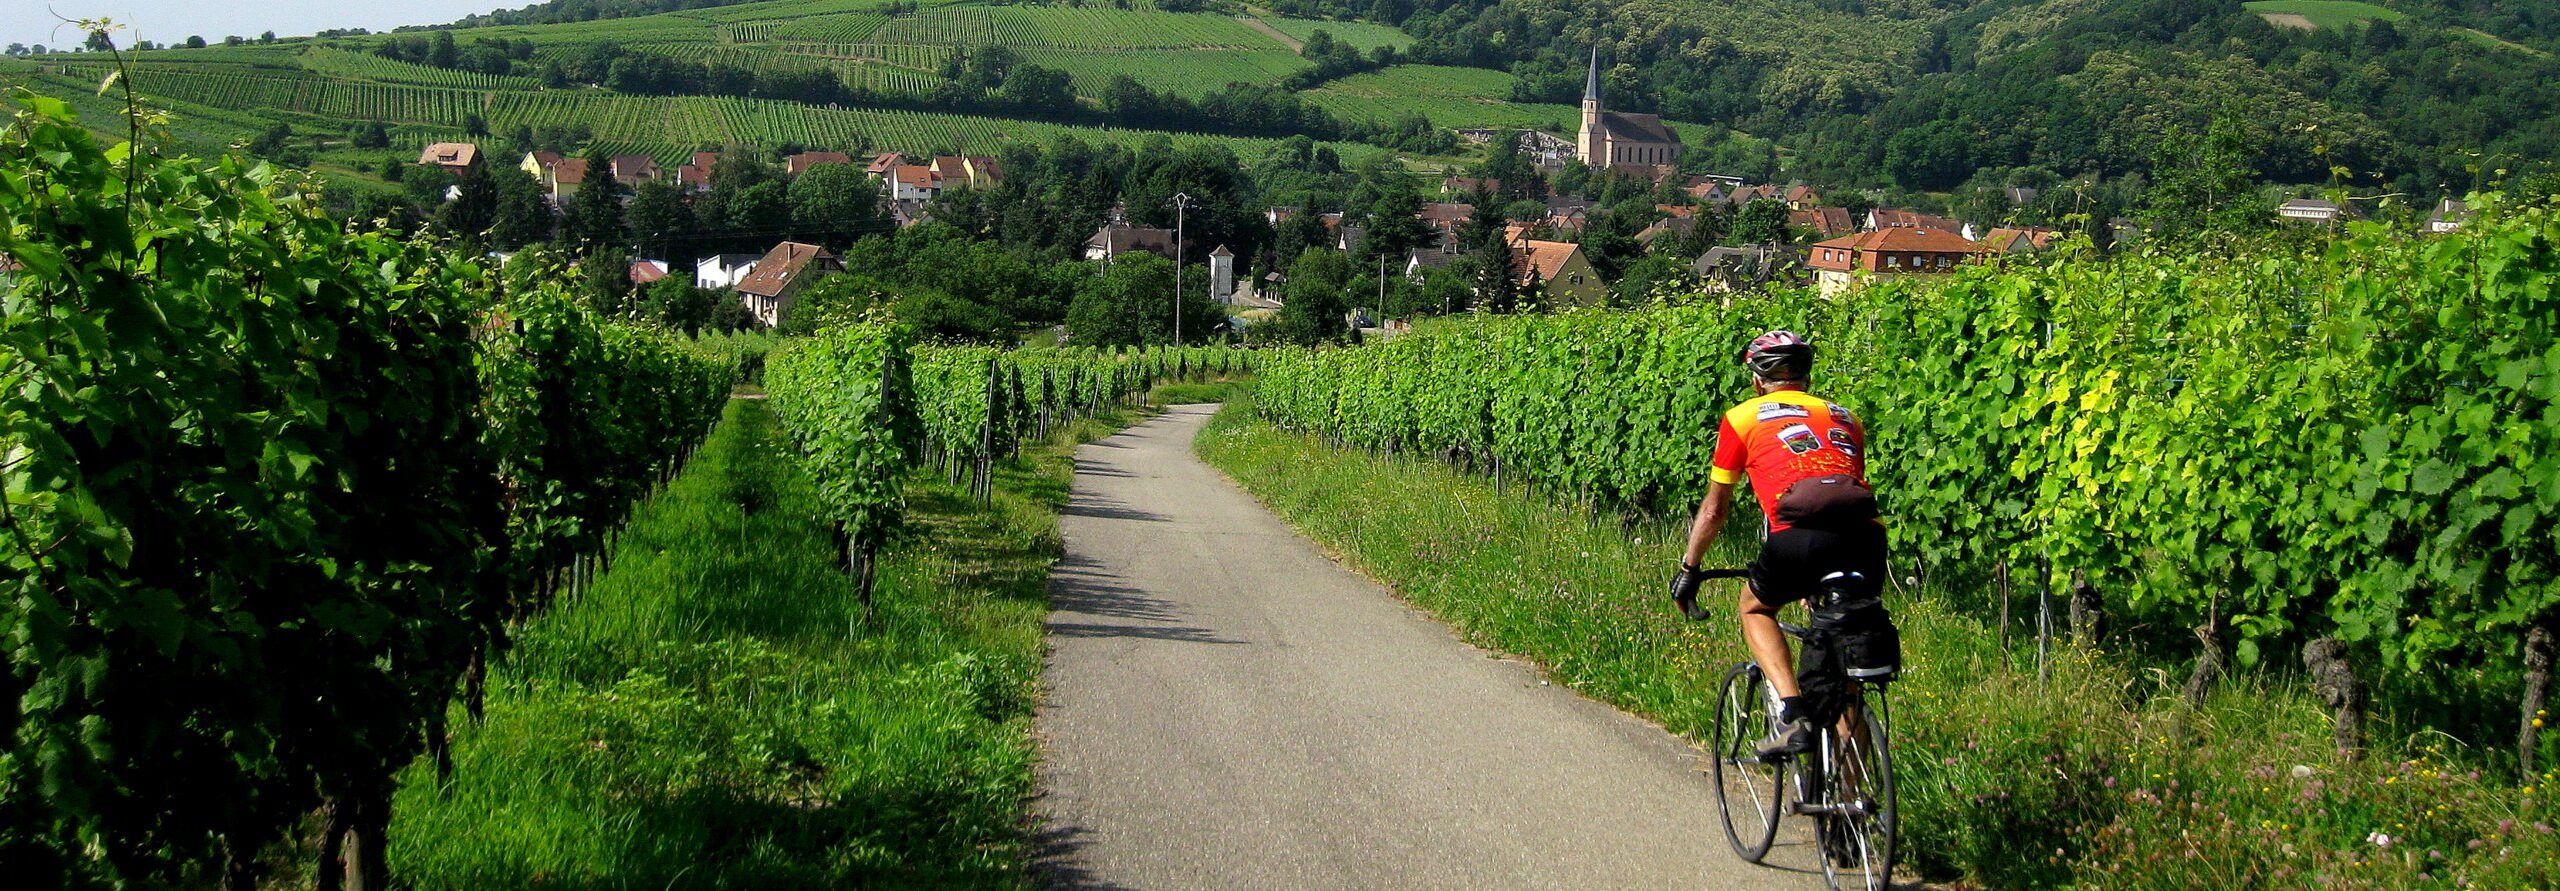 Exploring small villages in Alsace on this guided bike tour in france's wine country.